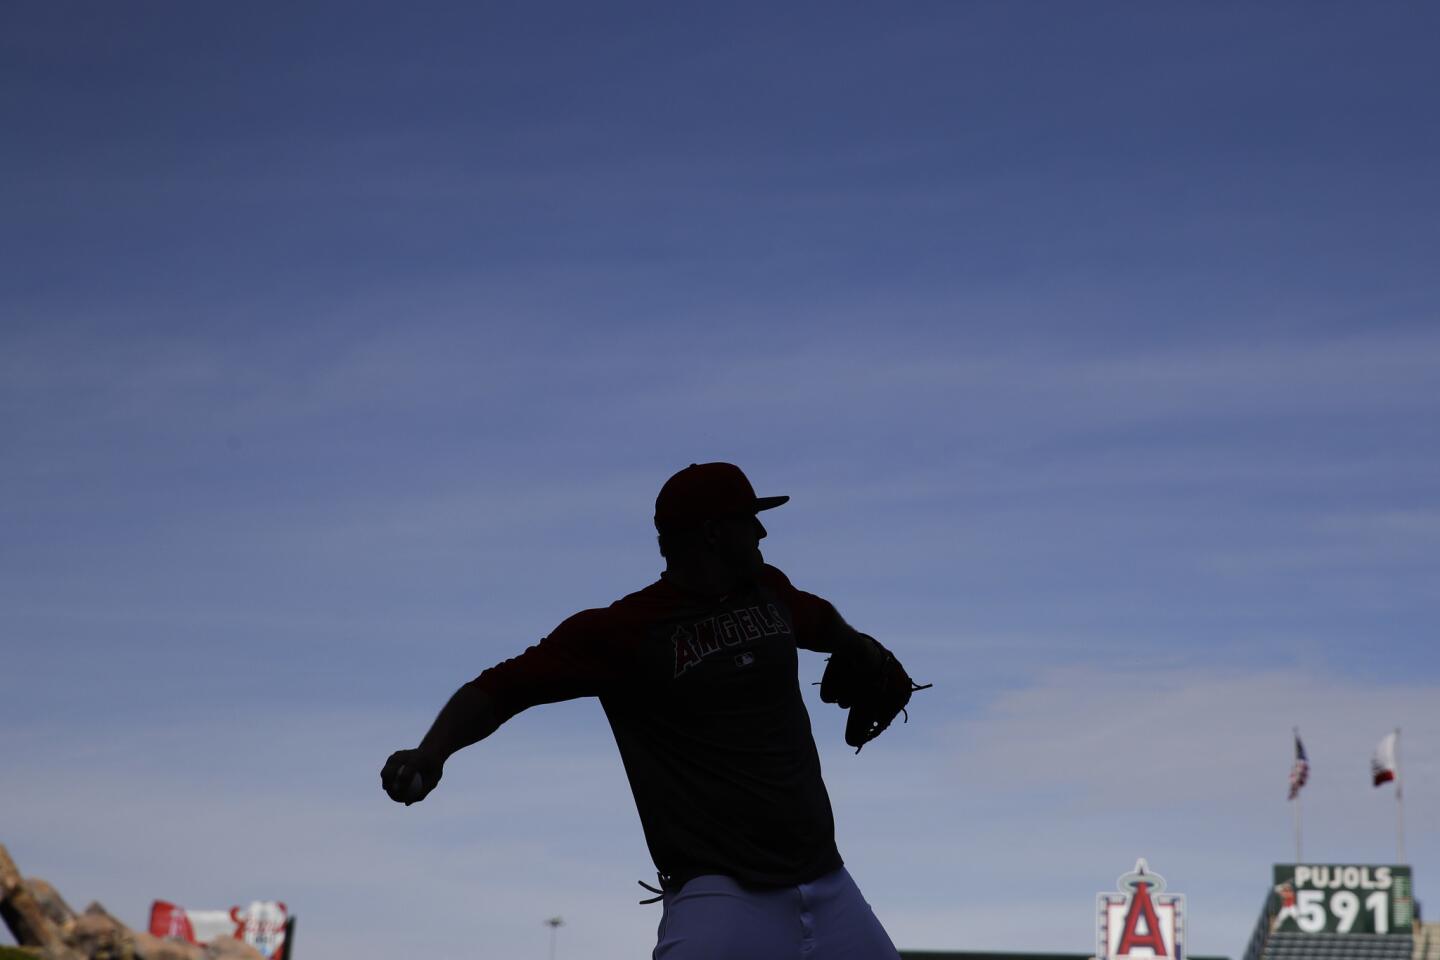 Los Angeles Angels' Mike Trout throws during warmups for a baseball game with the Seattle Mariners Friday, April 7, 2017, in Anaheim, Calif. (AP Photo/Jae C. Hong)